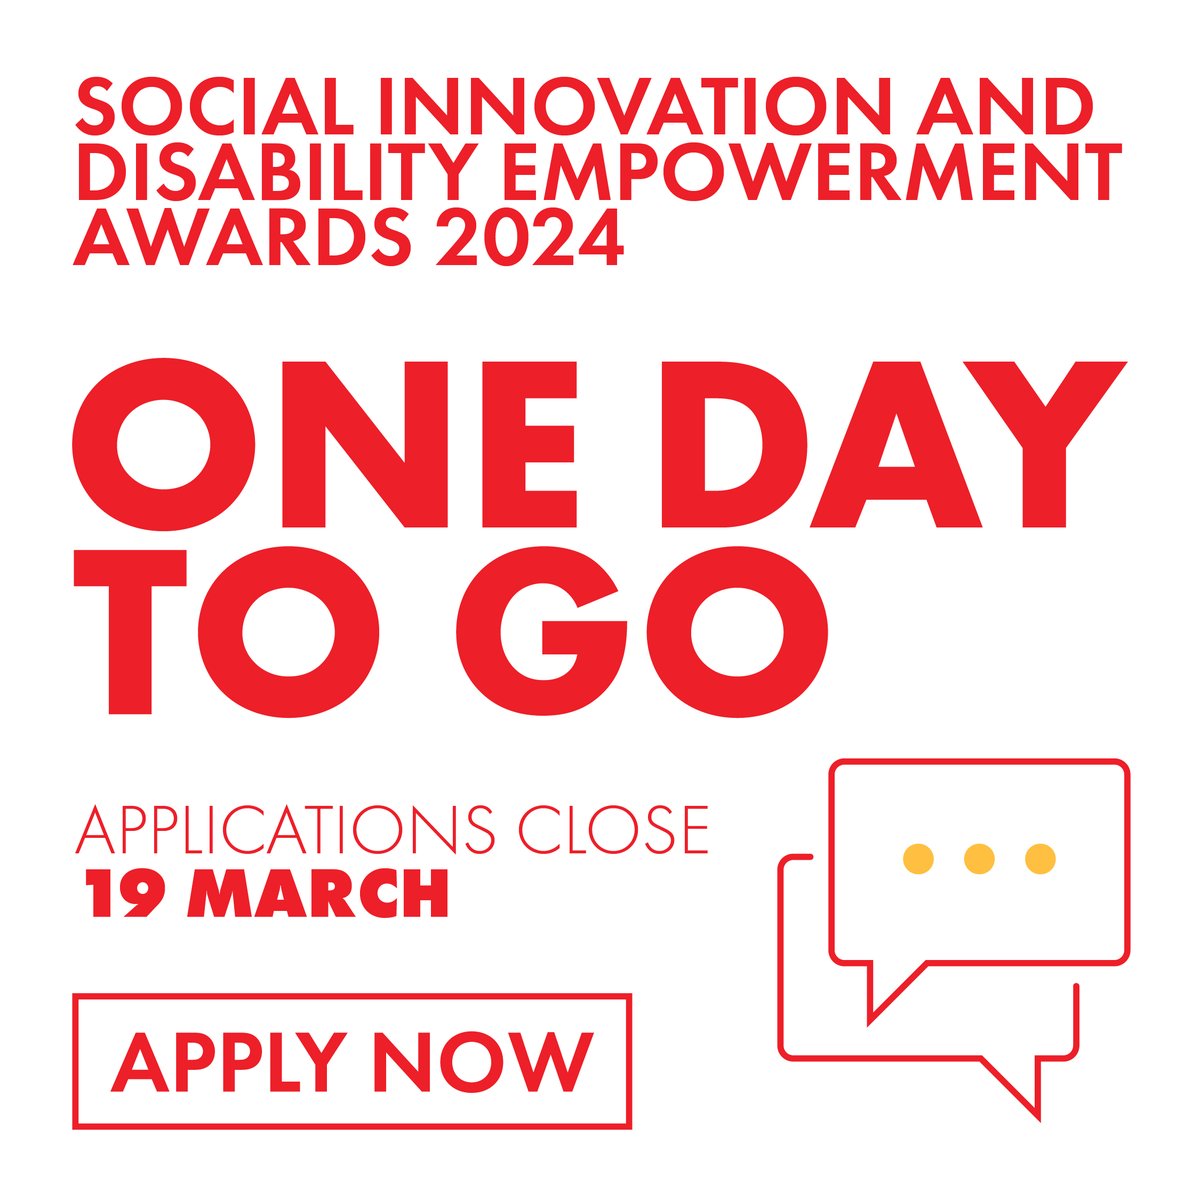 Just ONE DAY left to apply for our Social Innovation and Disability Empowerment Awards 2024. Apply now sabfoundation.co.za/social-innovat… #MakingADifference #ItStartsHere #SABFSIA2024